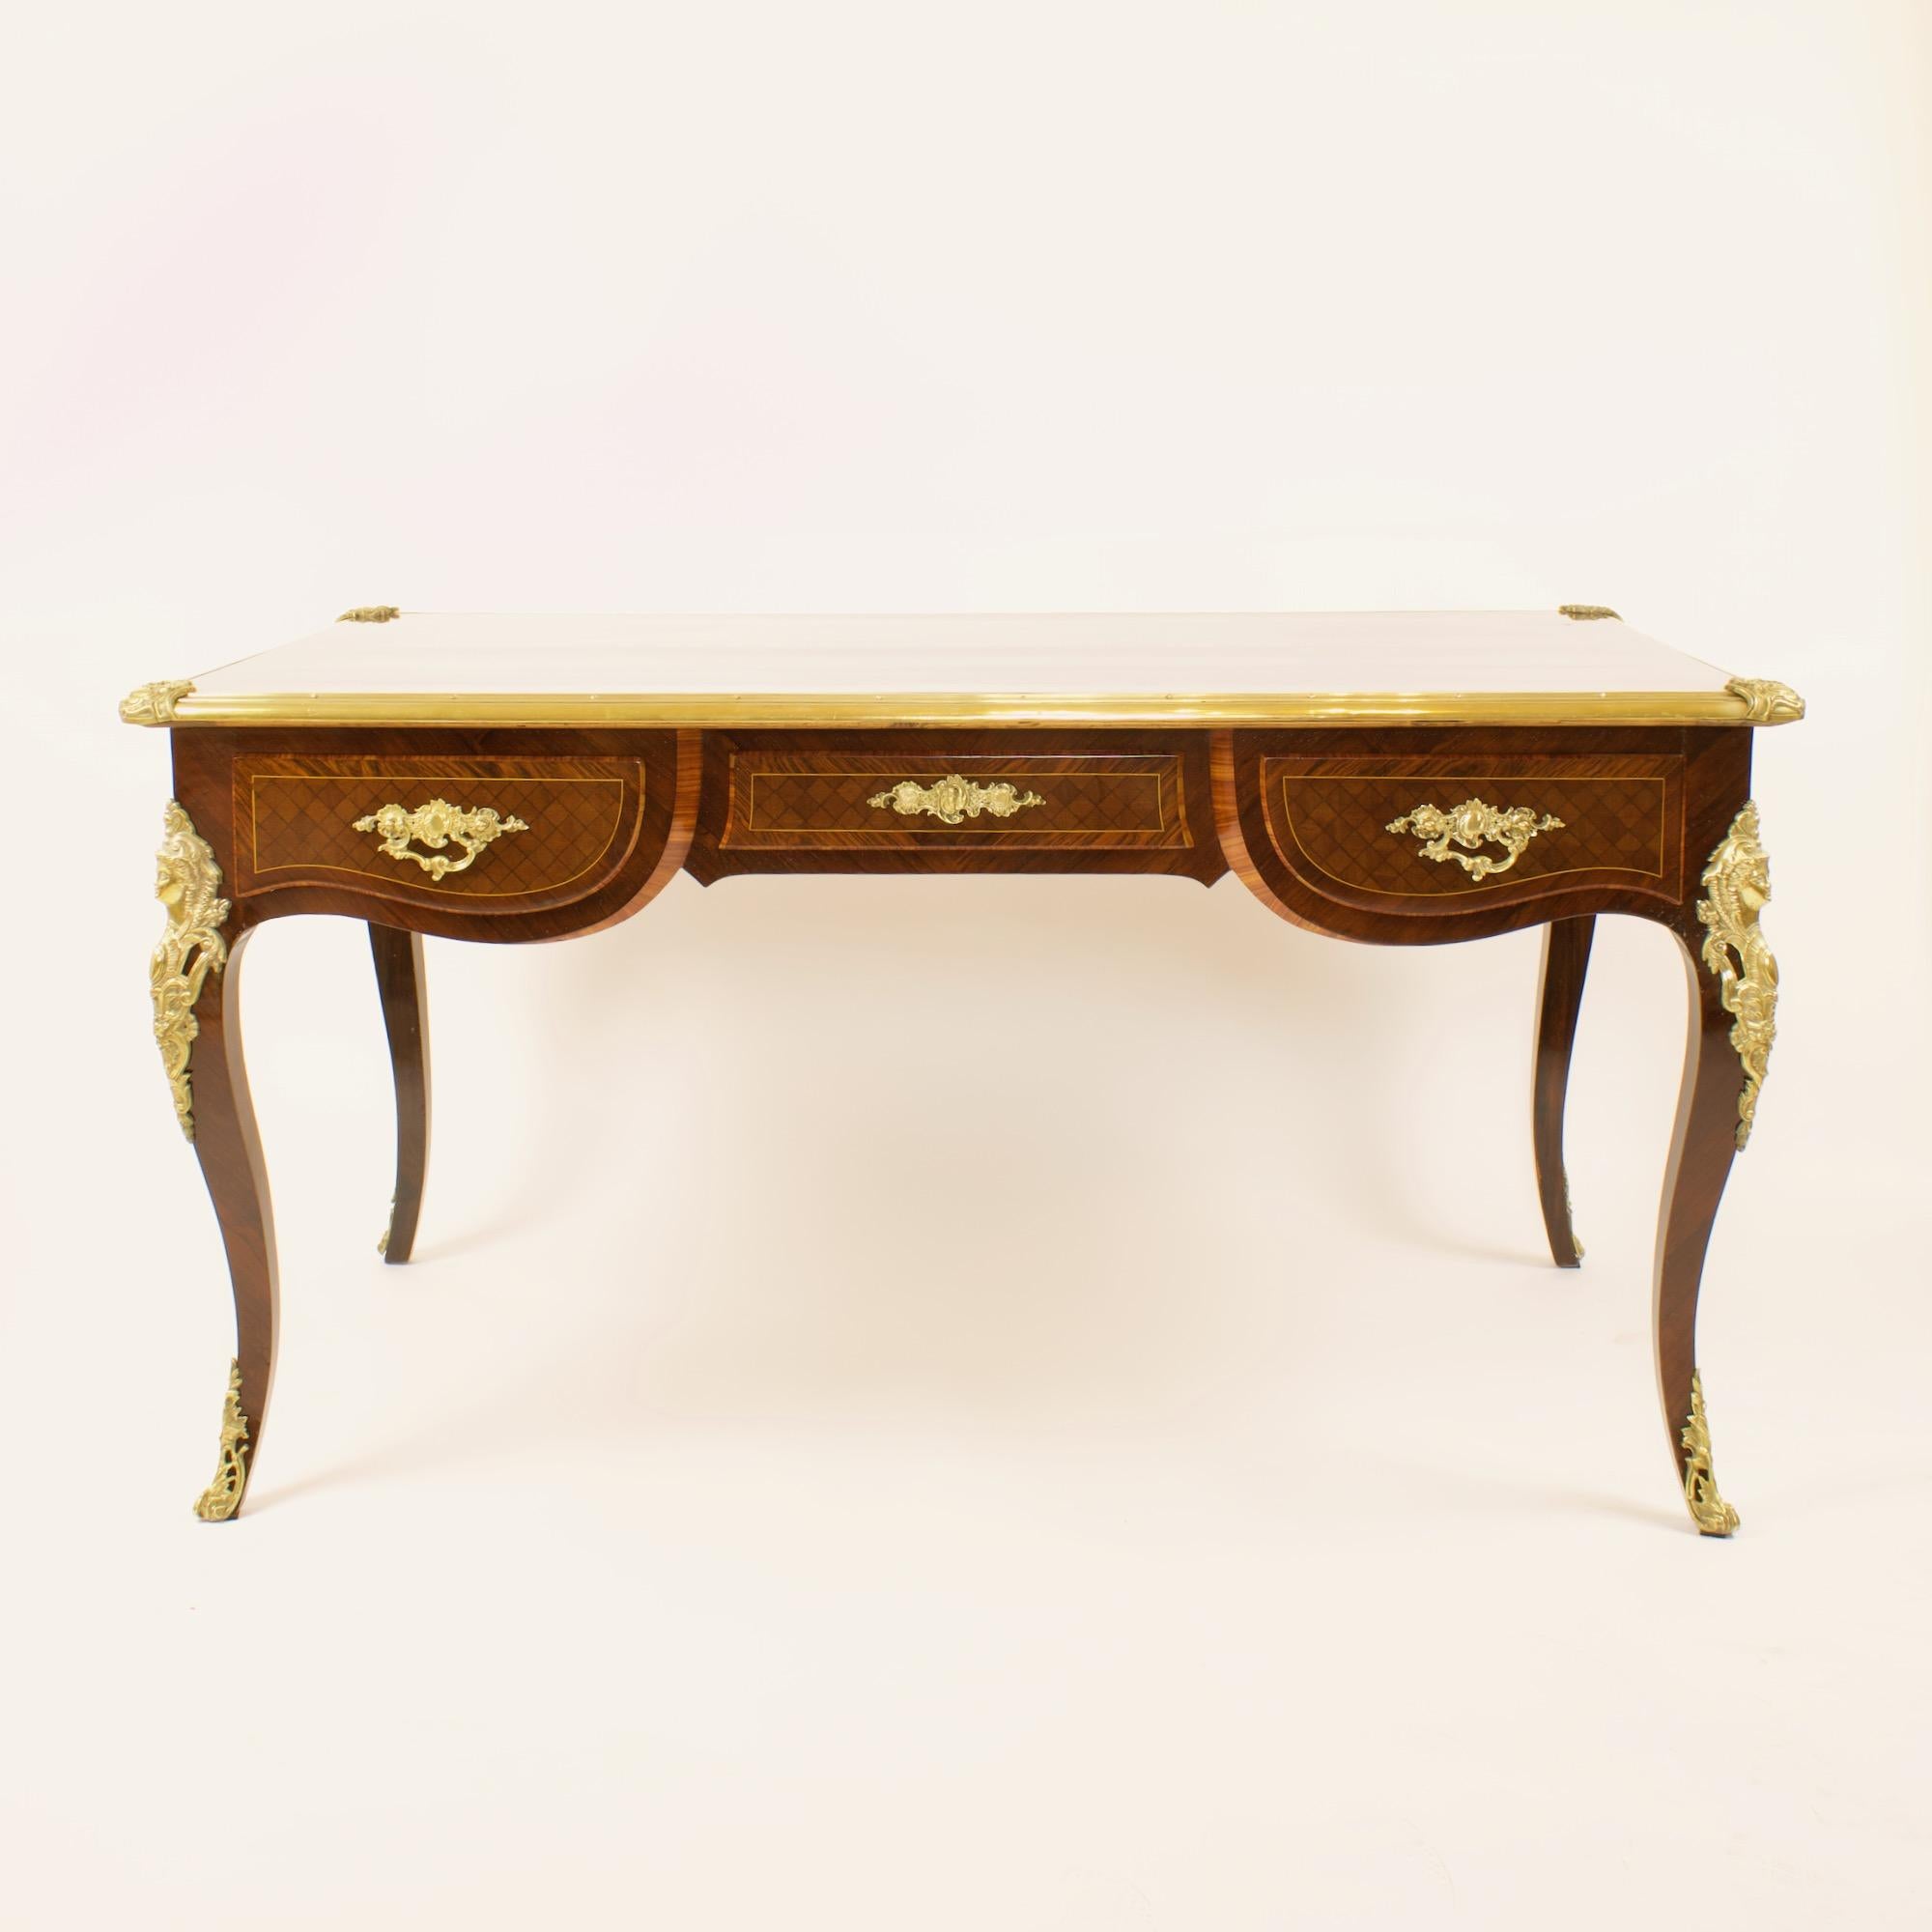 A 19th century Régence-/Louis XV-style gilt-bronze mounted and marquetry desk of freestanding form. With a brass banded rectangular top inset with a fine mirrored kingwood veneer surface, the brass banding with stylised floral corner cartouches.